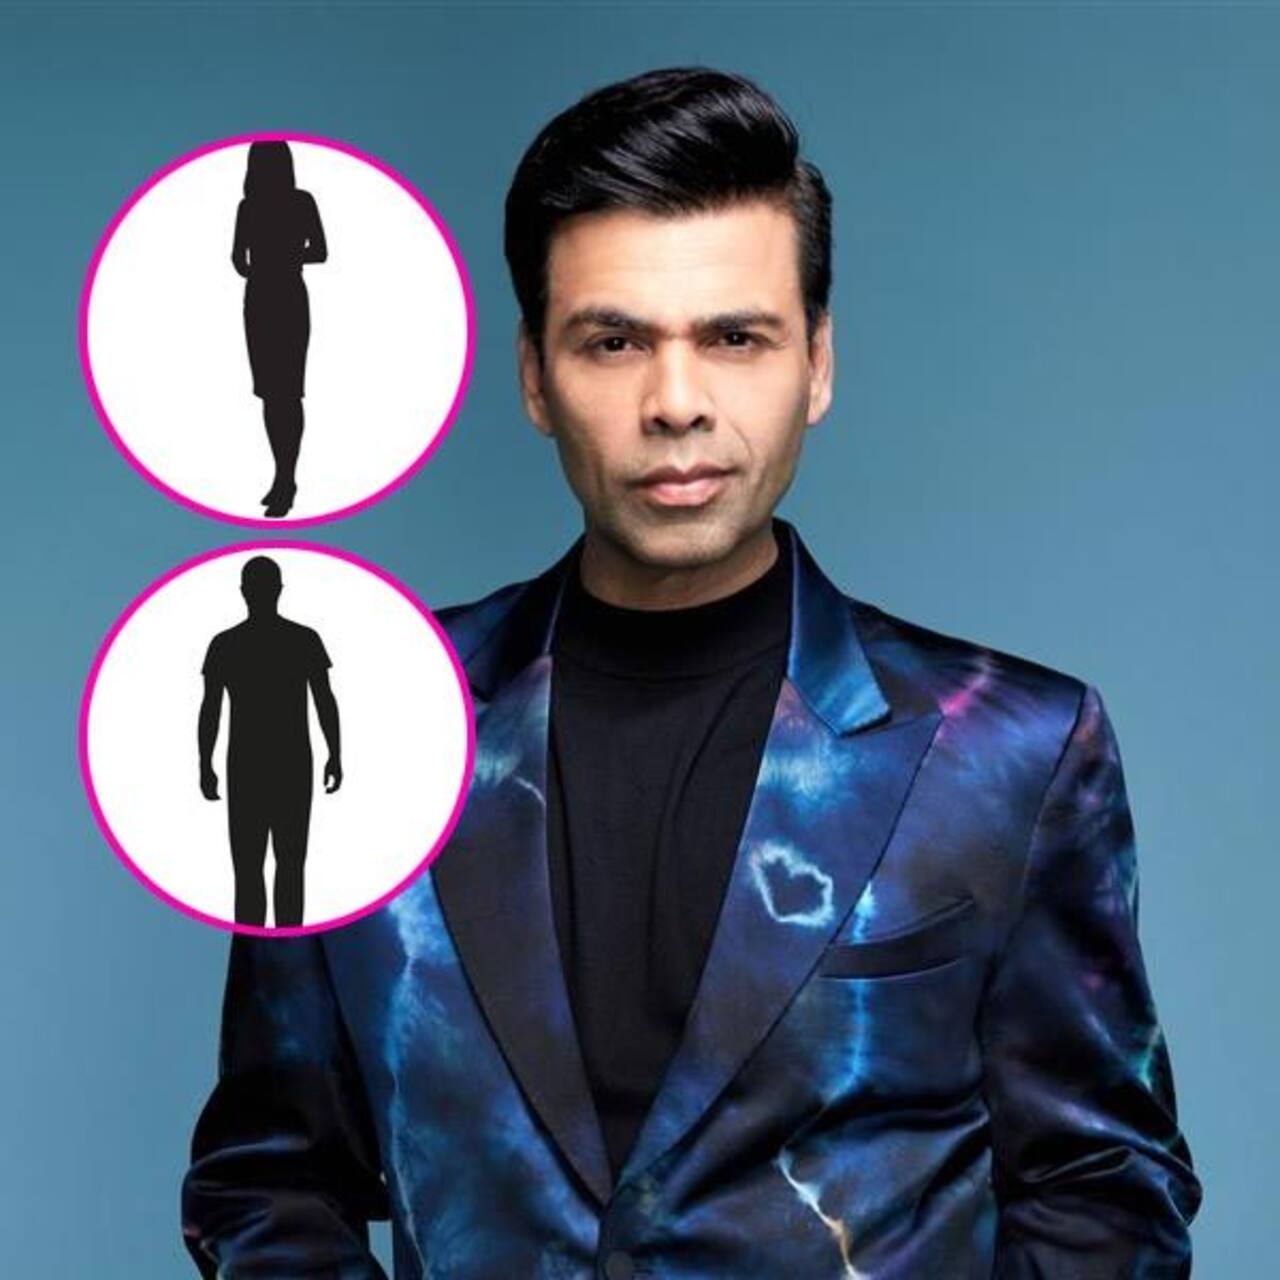 Koffee With Karan 7: Karan Johar REVEALS he won't be able to get these 2 celebs on his chat show [Read Deets]